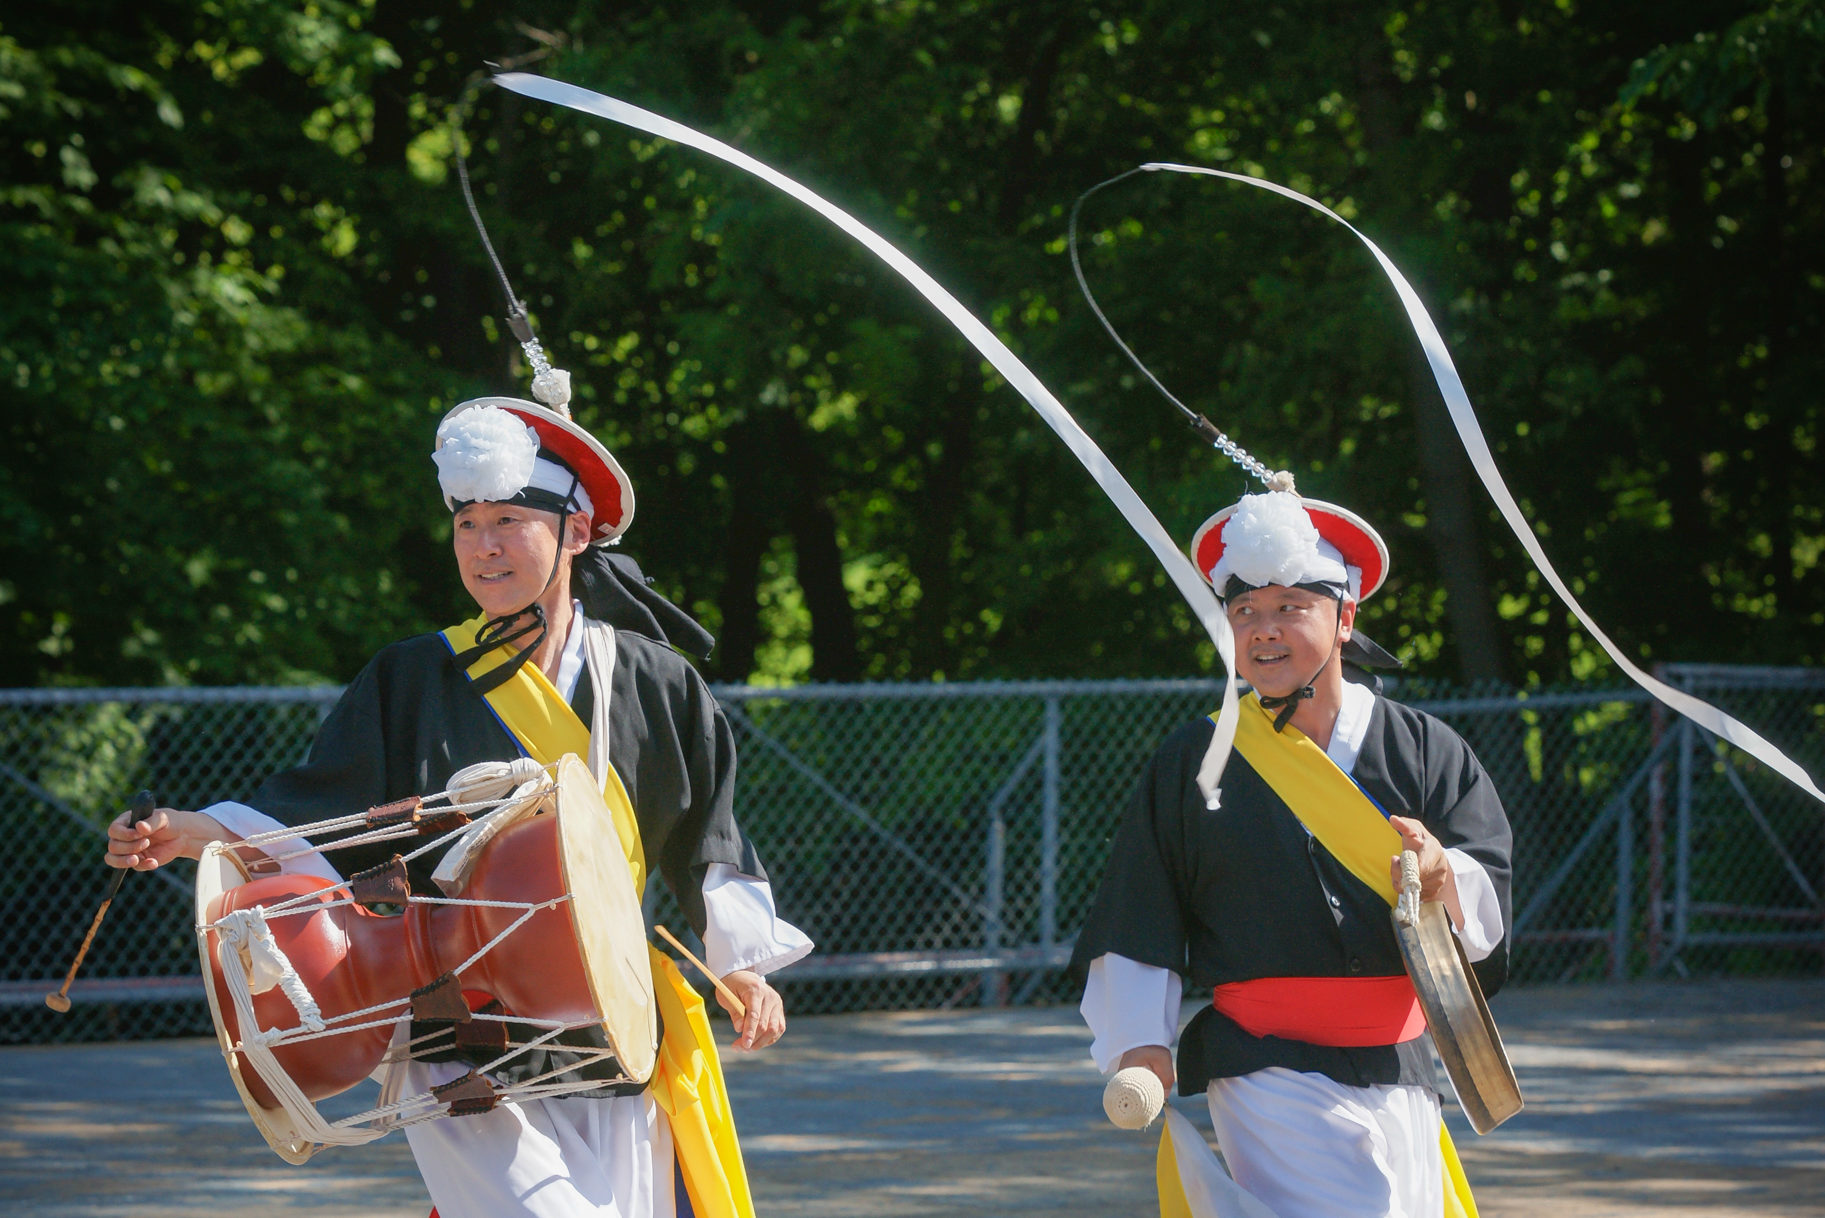 Two men in colourful costumes play the drums as they dance and move long ribbons attached to their hats.